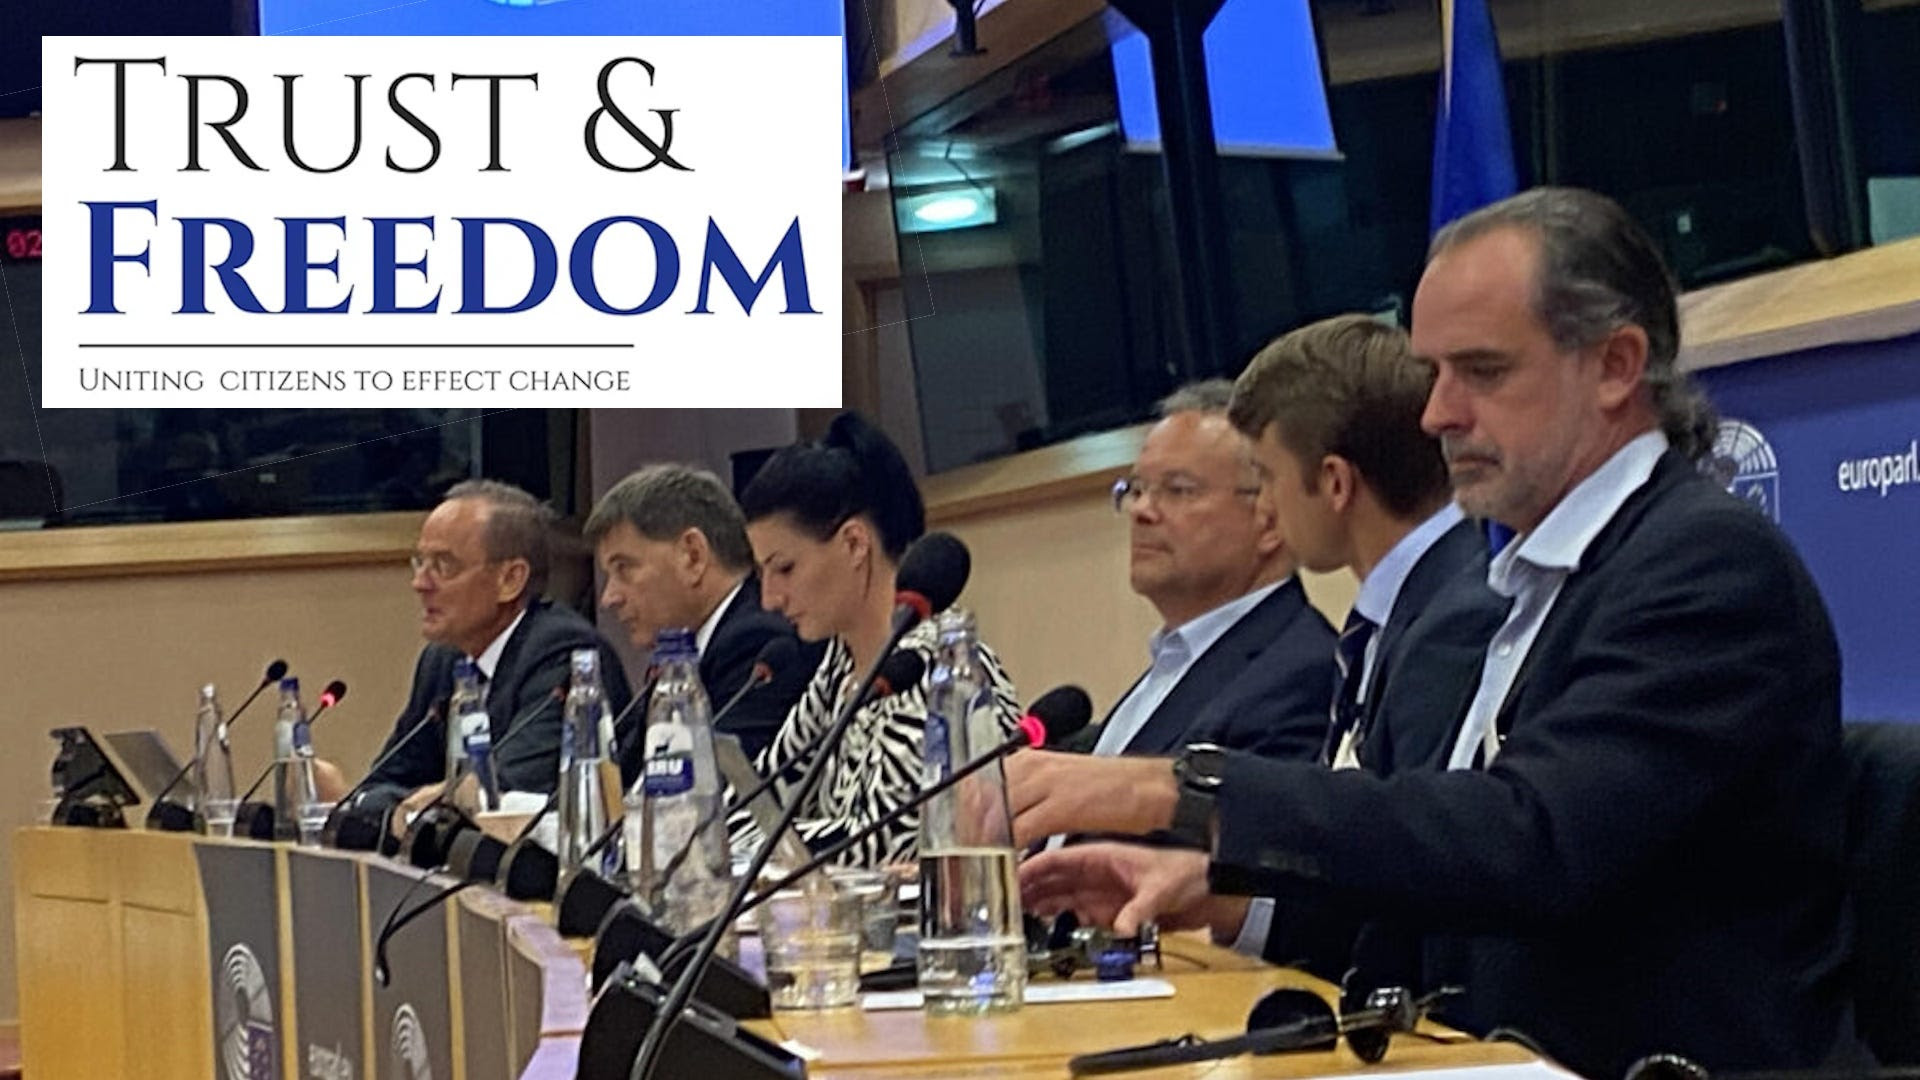  EU Parliament: The People Pushback Against WHO Pandemic Treaty Tyranny Https%3A%2F%2Fsubstack-post-media.s3.amazonaws.com%2Fpublic%2Fimages%2F6d4c9cd5-0aef-4b13-83ae-d2c34dd56f95_1920x1080